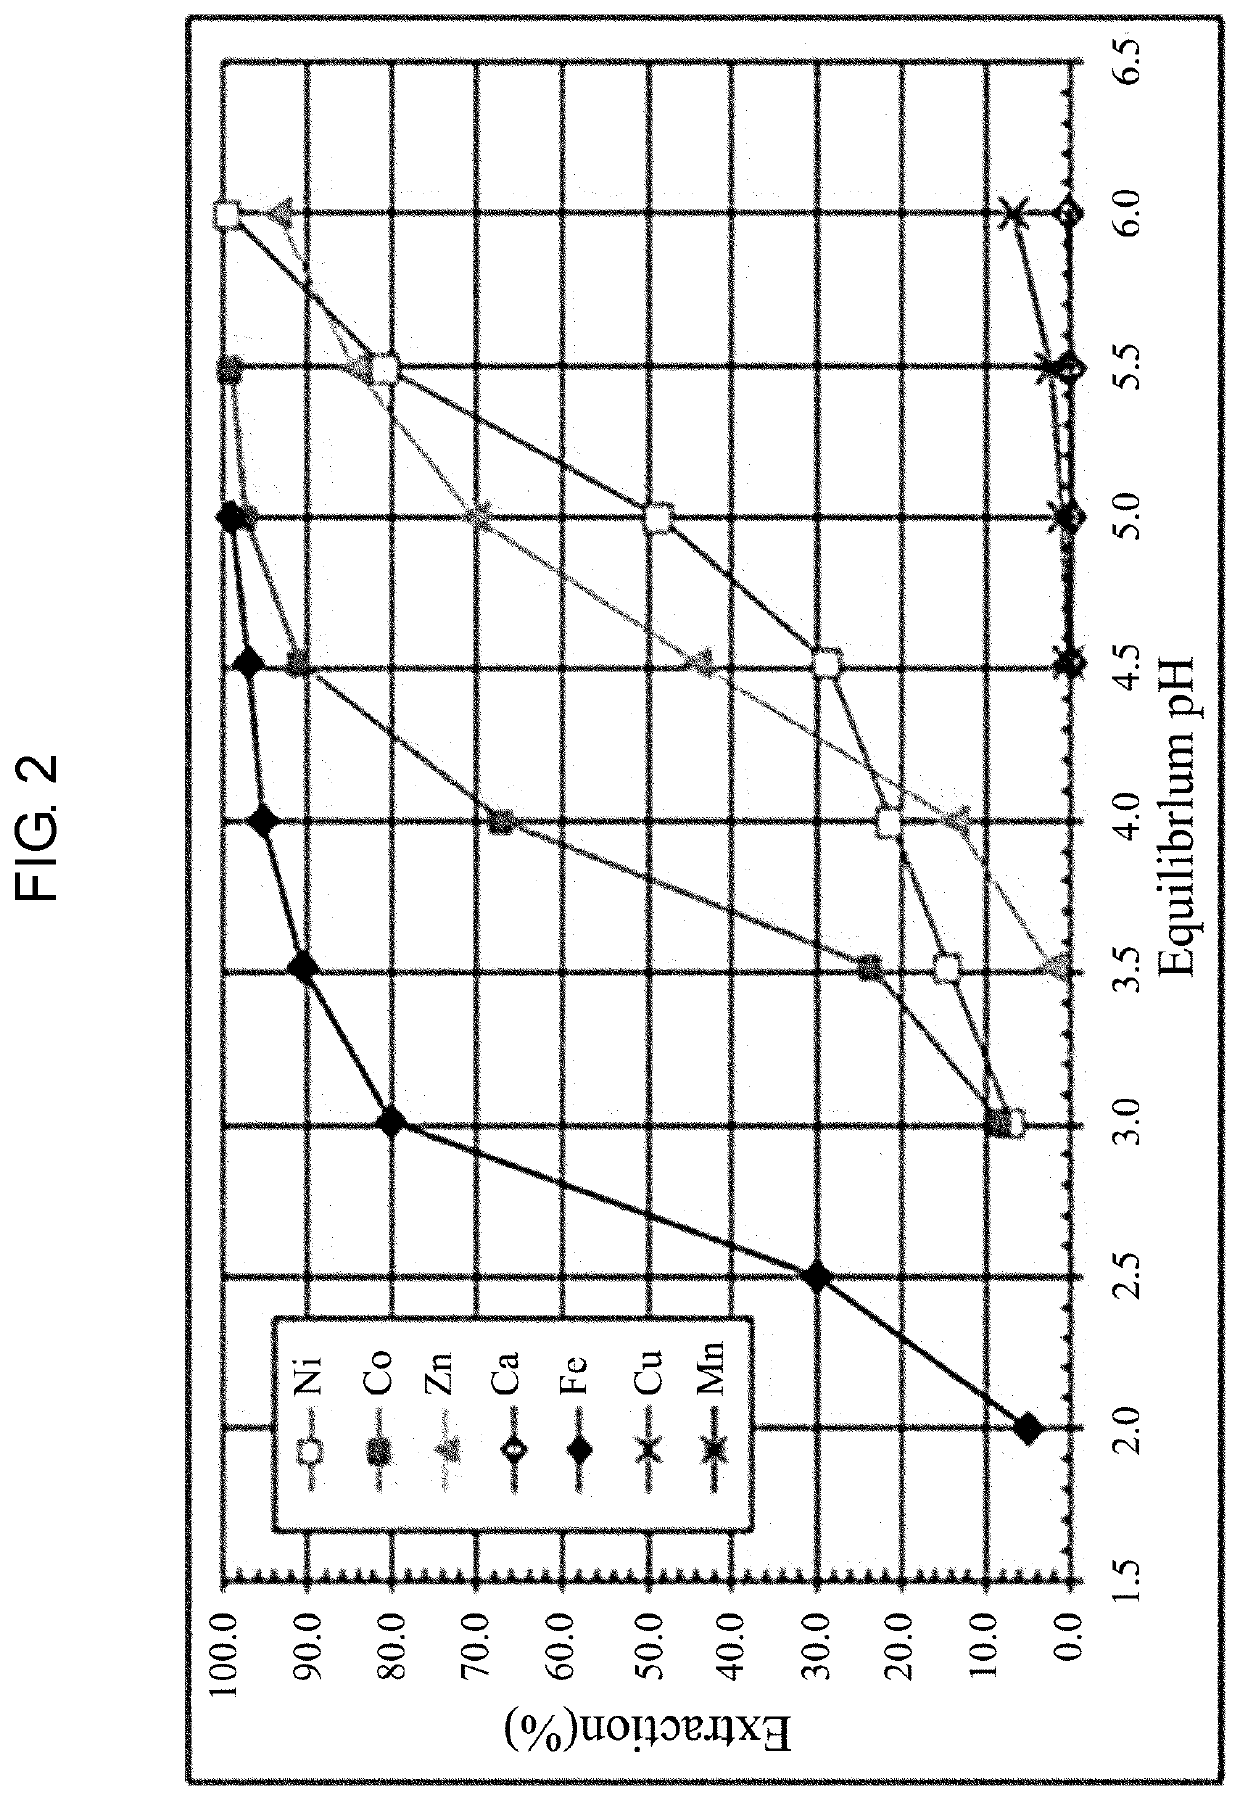 Method for inhibiting extractant degradation of dsx process through metal extraction control